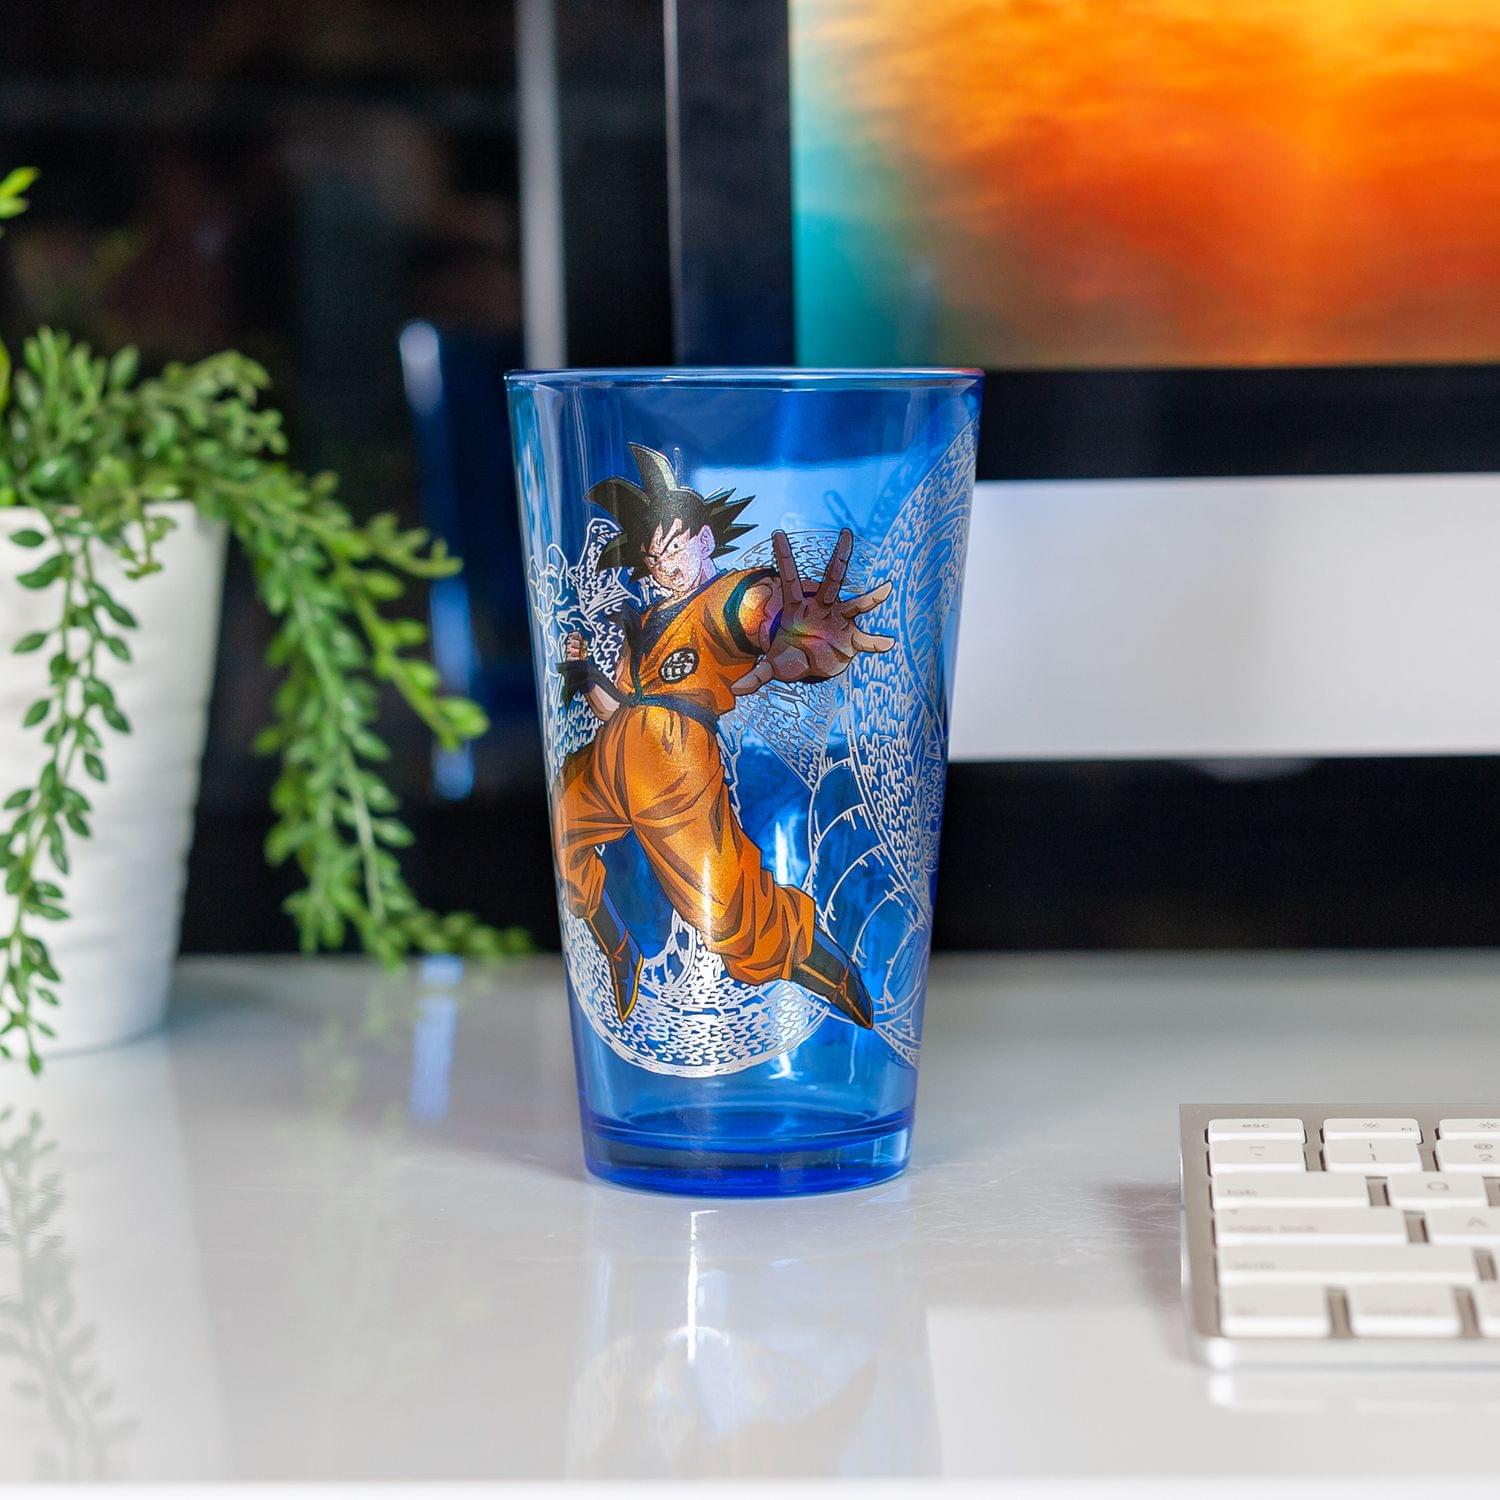 Dragon Ball 16 Oz Pint Glass | Goku and Shenron Collectable Blue Drinking Cup